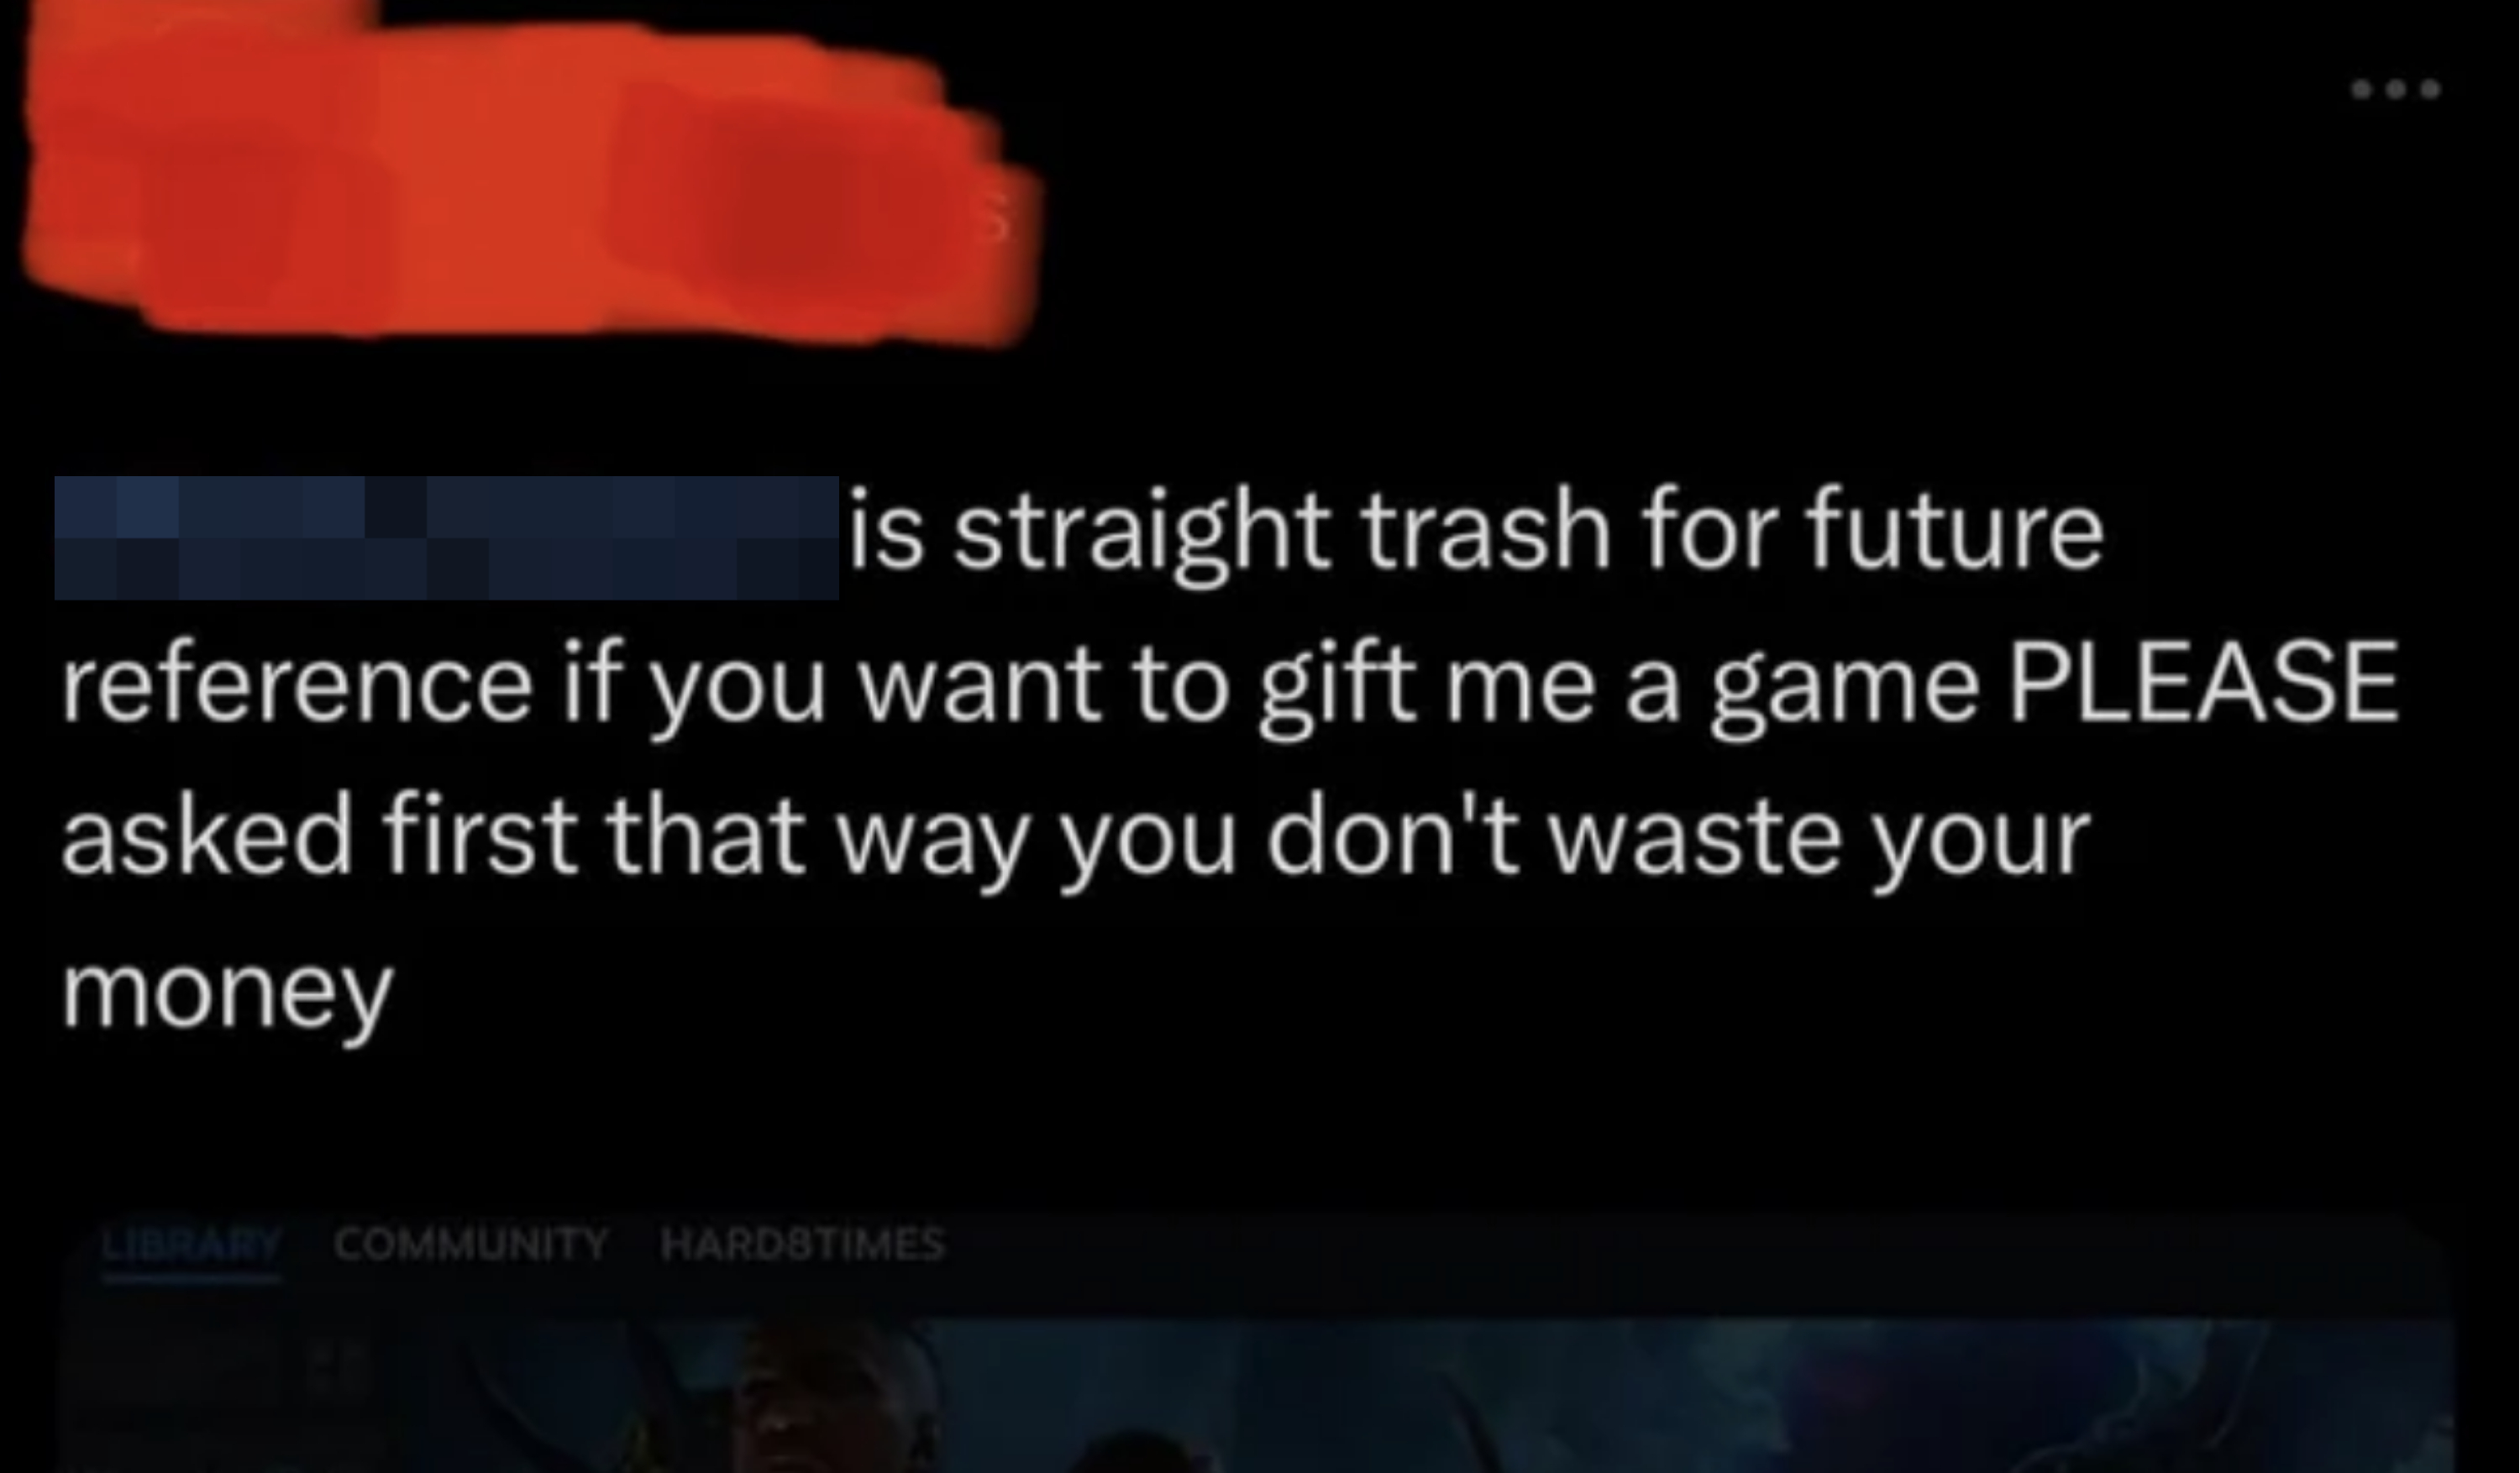 &quot;if you want to gift me a game PLEASE asked first that way you don&#x27;t waste your money&quot;